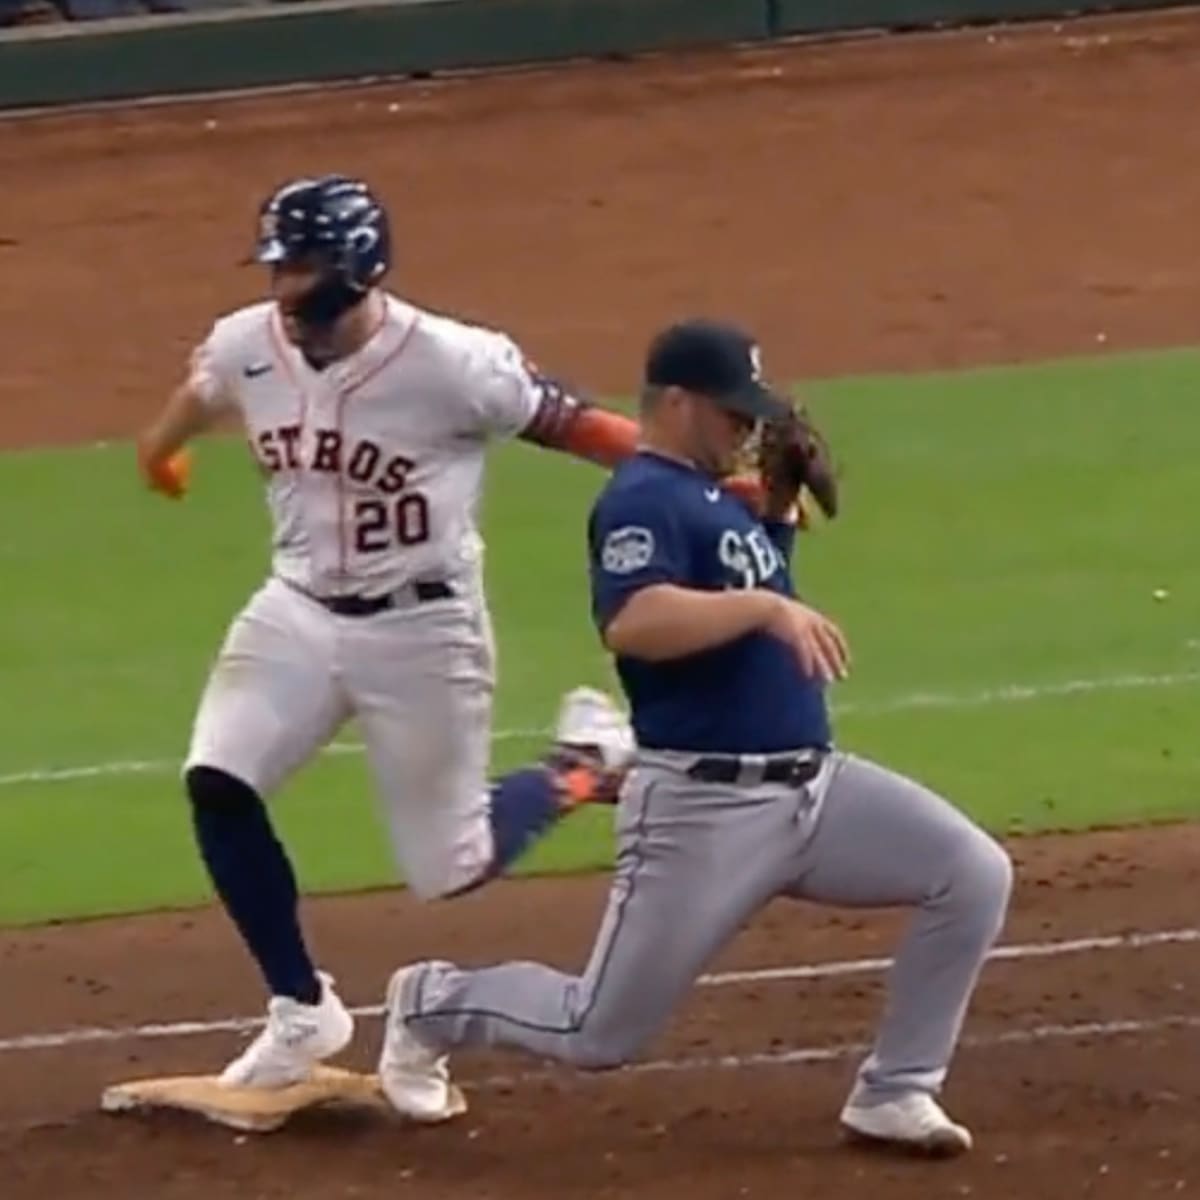 Astros-Mariners: MLB Fans Crush Chas McCormick for His Dirty Play